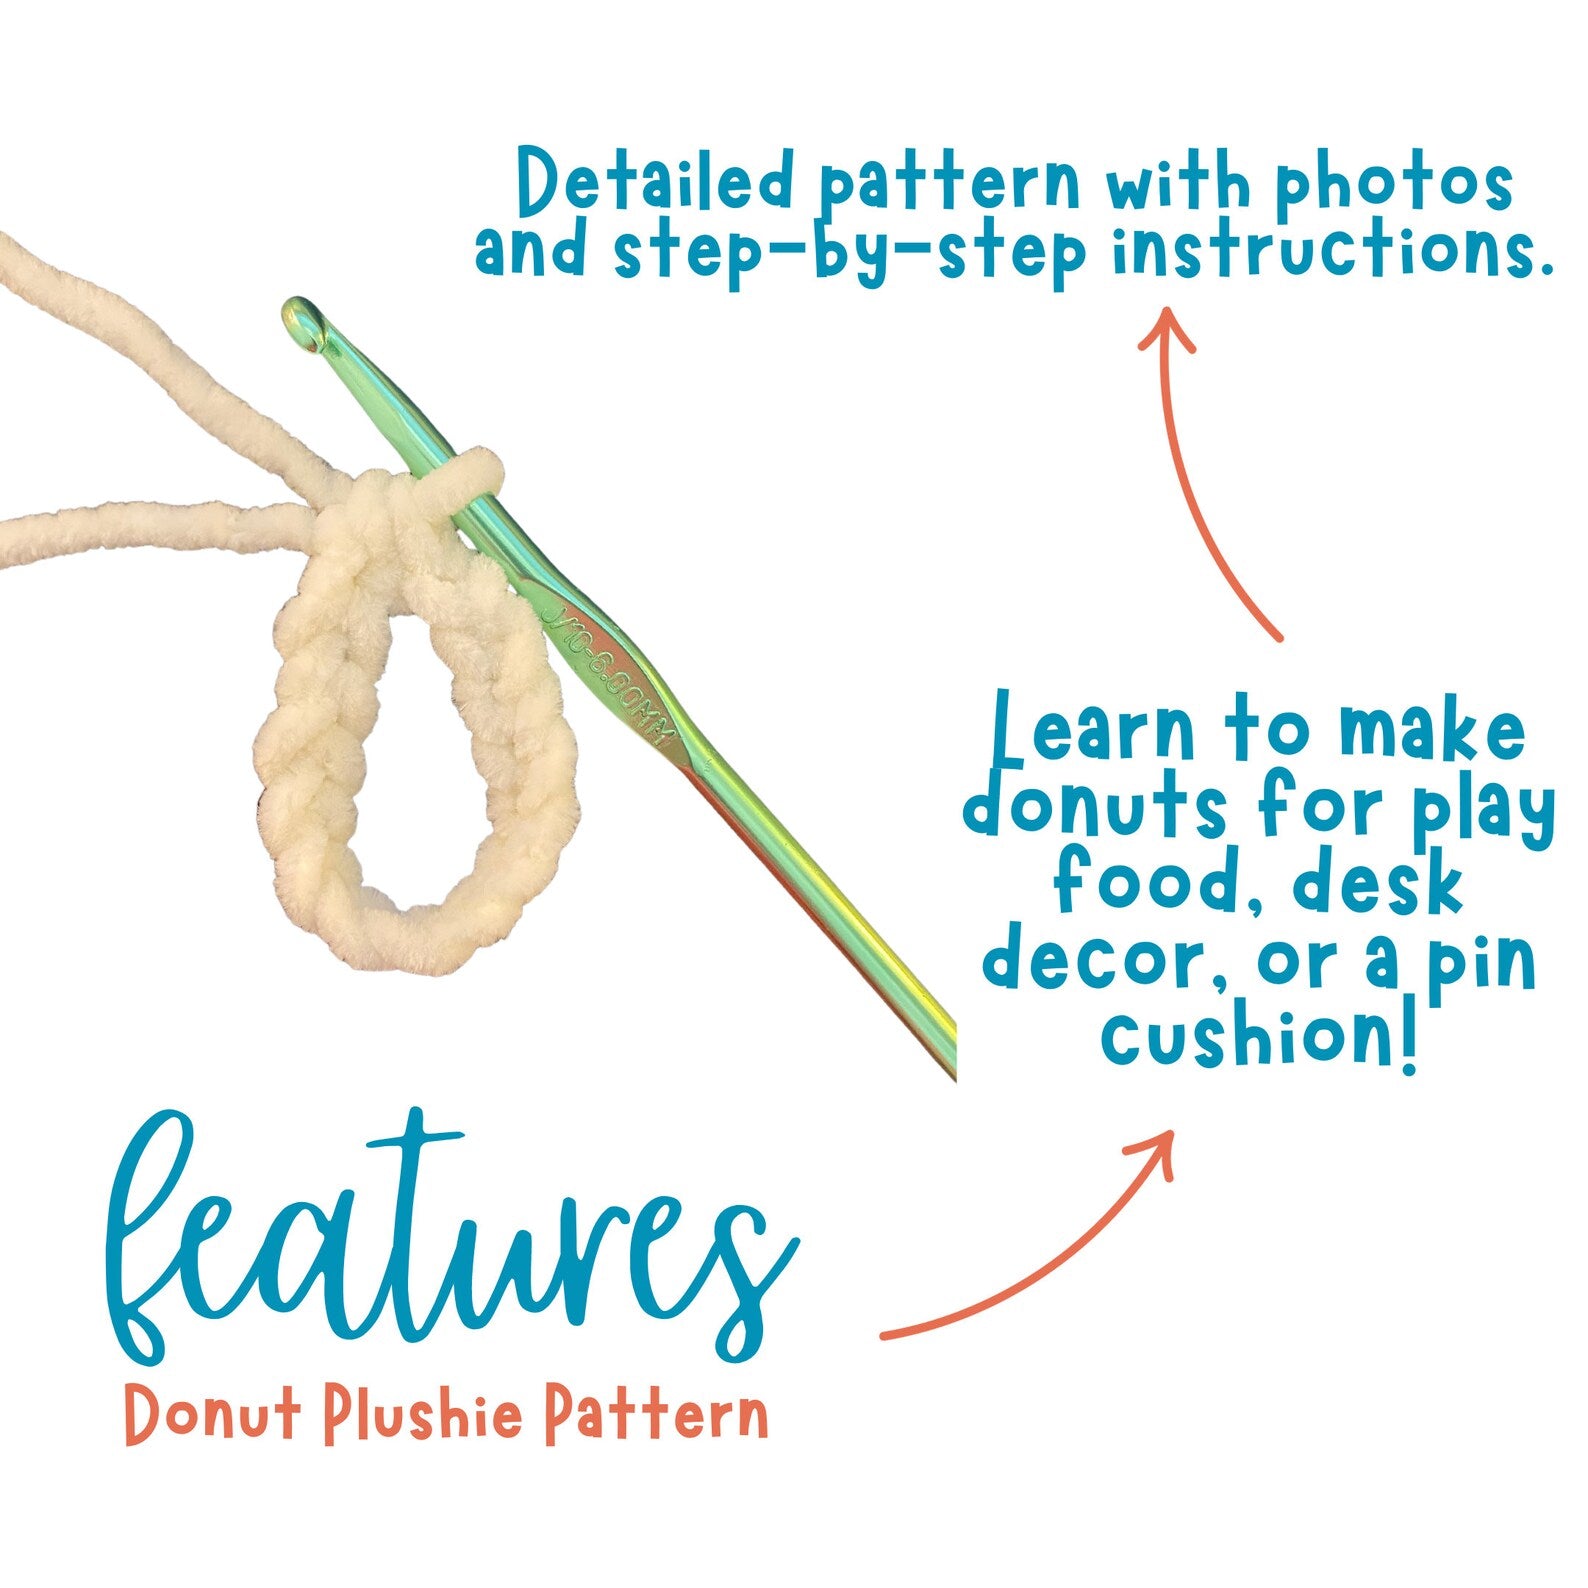 Puffin Crochet Lovey Pattern PDF  Easy Crochet Patterns for Beginners –  Simply Hooked Marcy